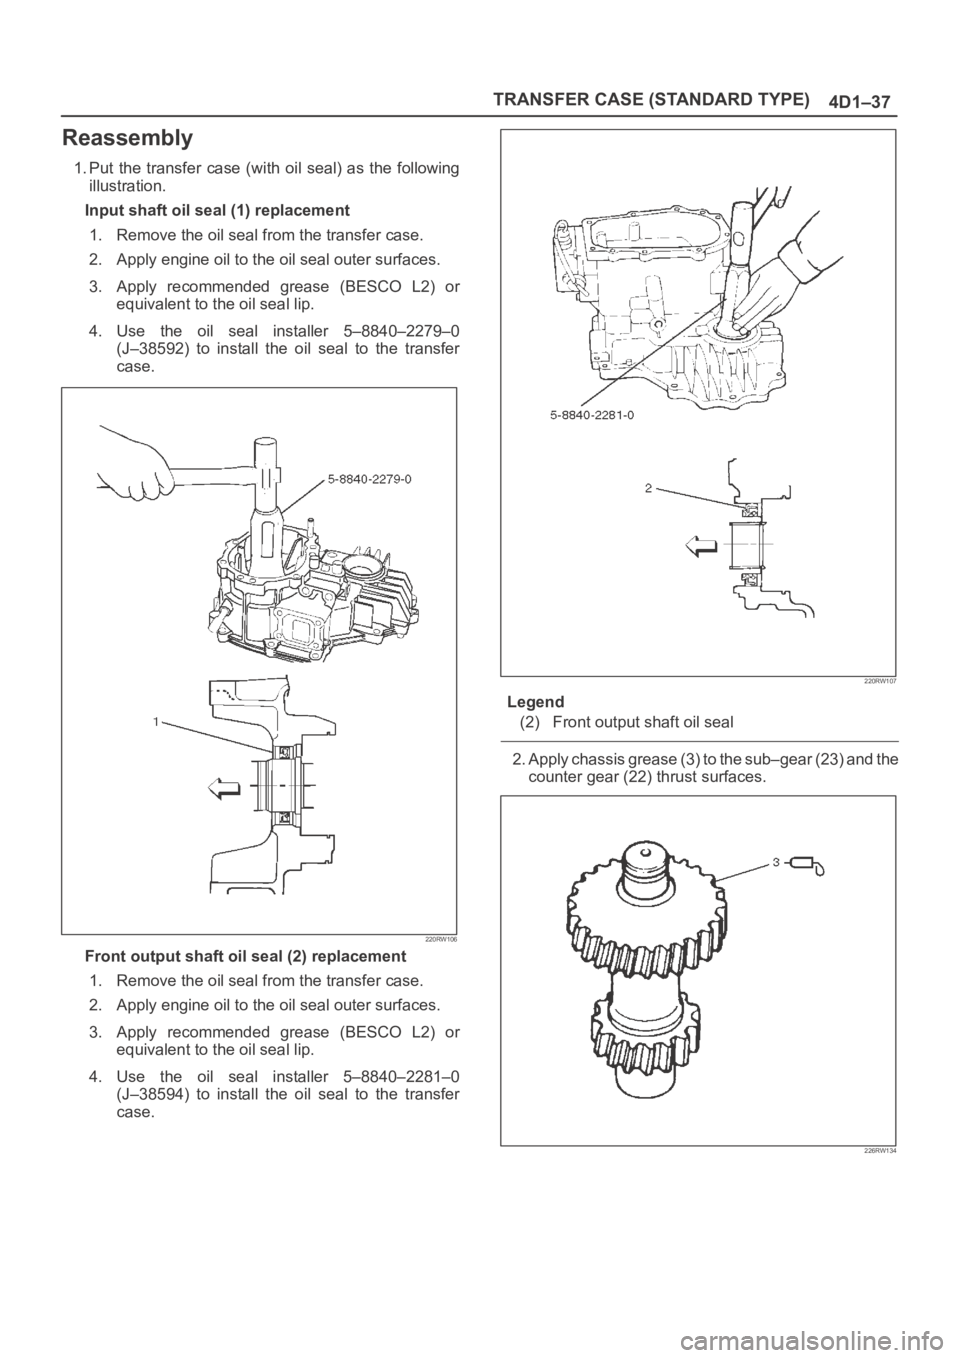 OPEL FRONTERA 1998  Workshop Manual TRANSFER CASE (STANDARD TYPE)
4D1–37
Reassembly
1. Put  the  transfer  case  (with  oil seal) as  the  following
illustration.
Input shaft oil seal (1) replacement
1. Remove the oil seal from the tr